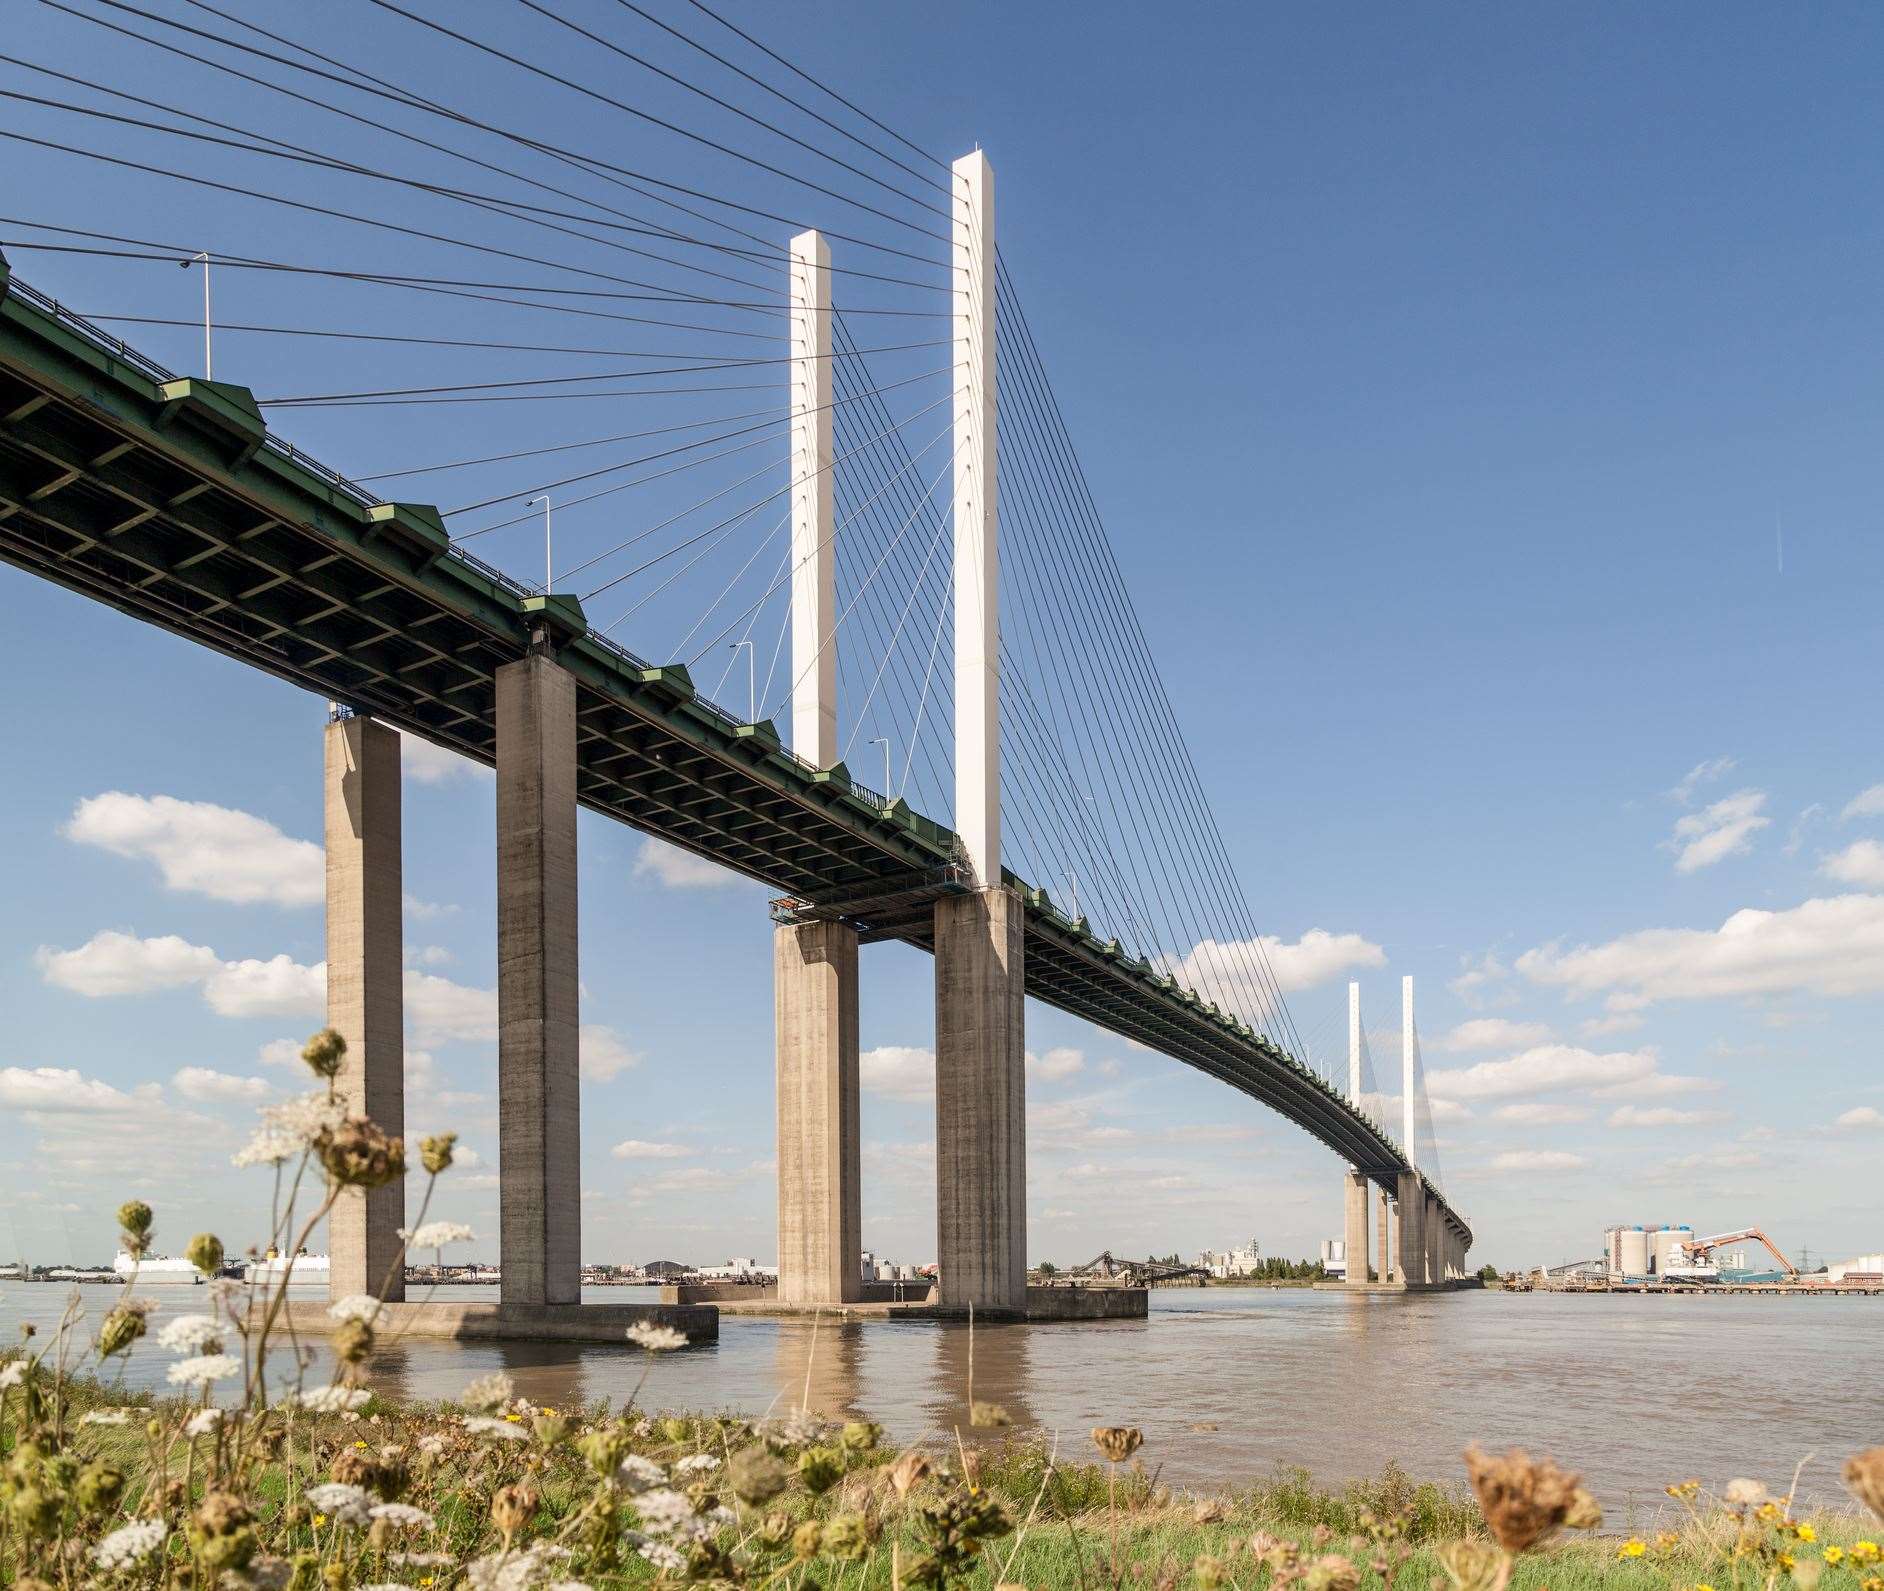 The Dartford Crossing is subject to an automated payment system known as the Dart Charge. (15934070)